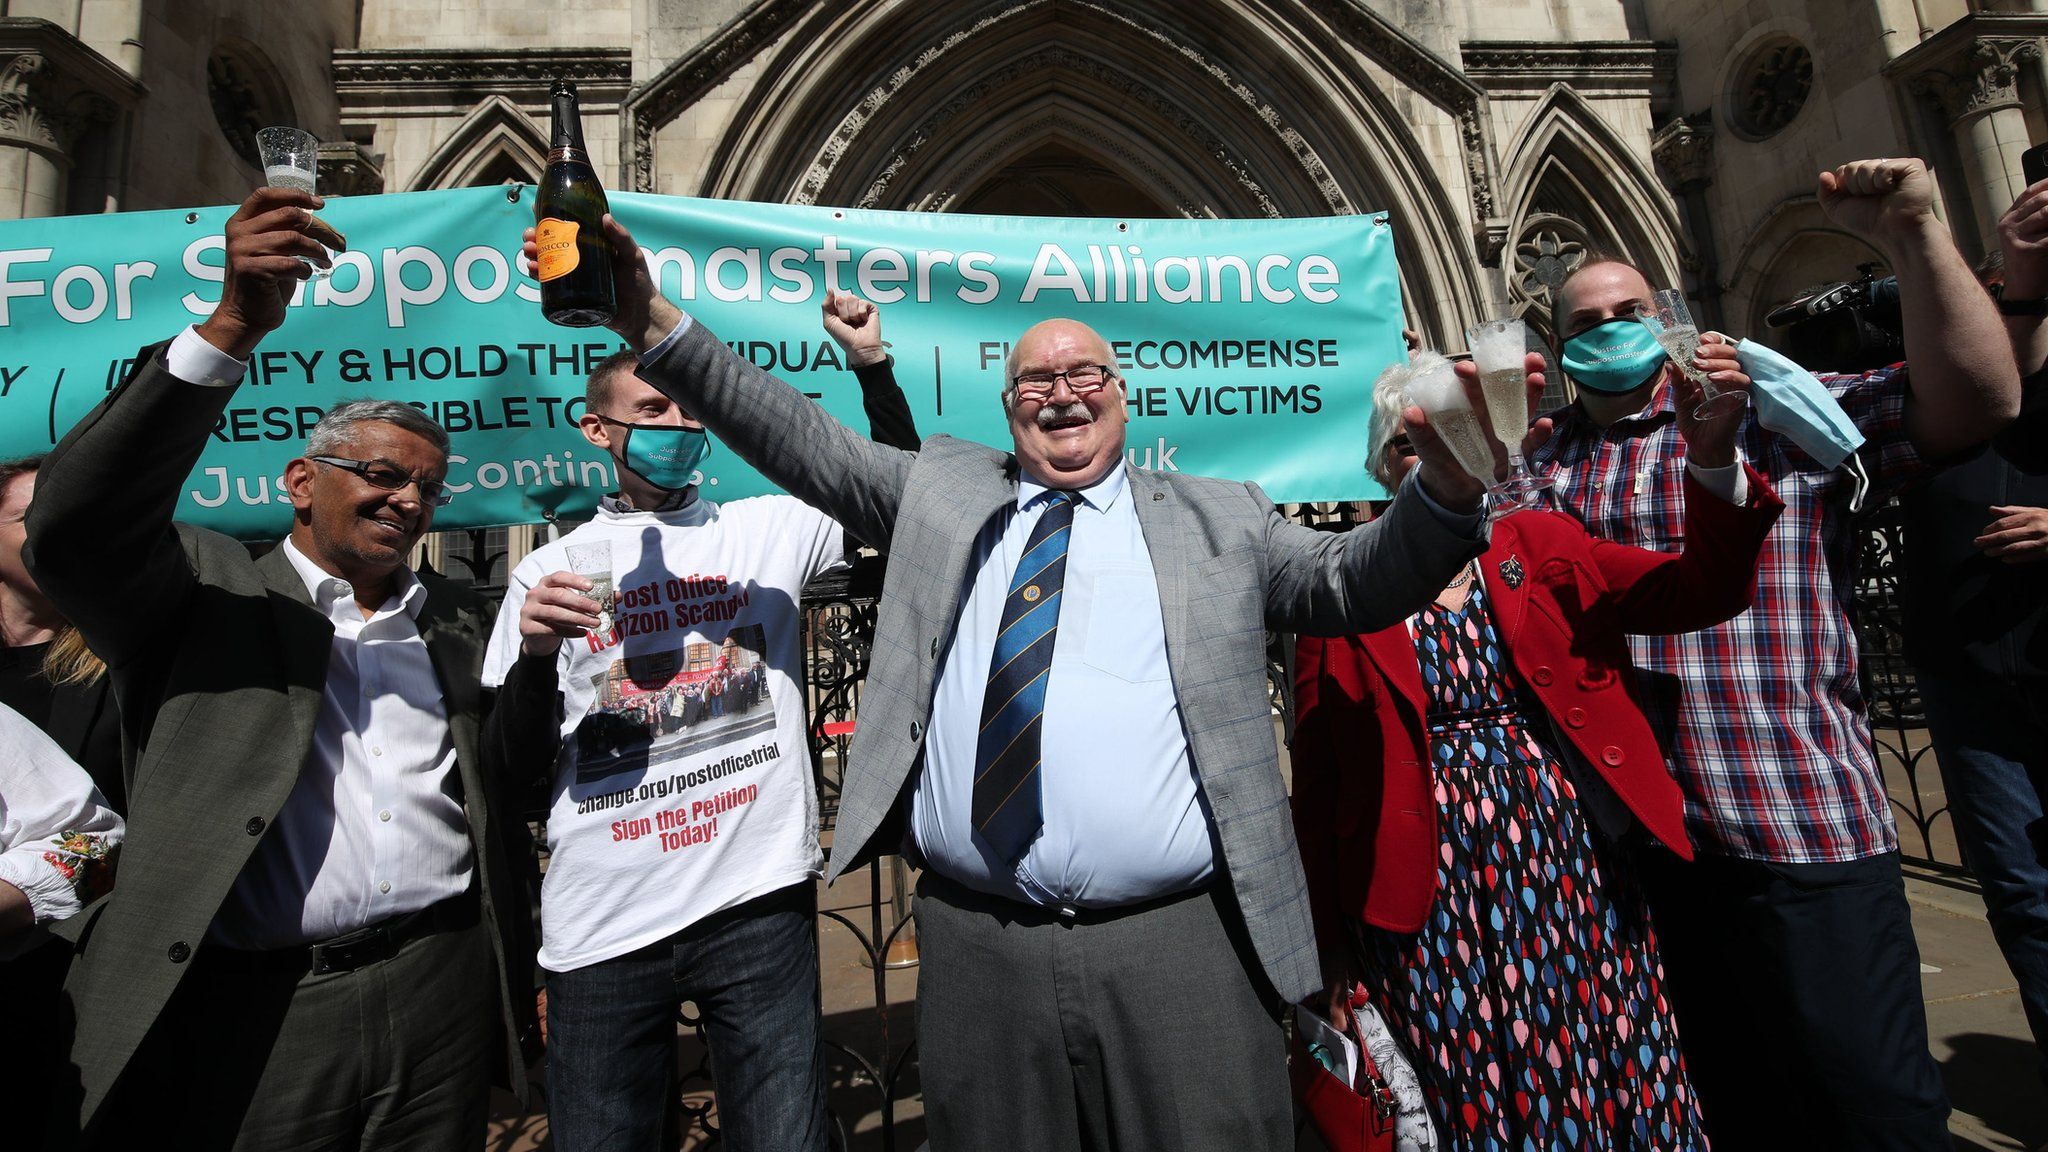 Former post office workers celebrate outside the Royal Courts of Justice, London, after having their convictions overturned by the Court of Appeal.